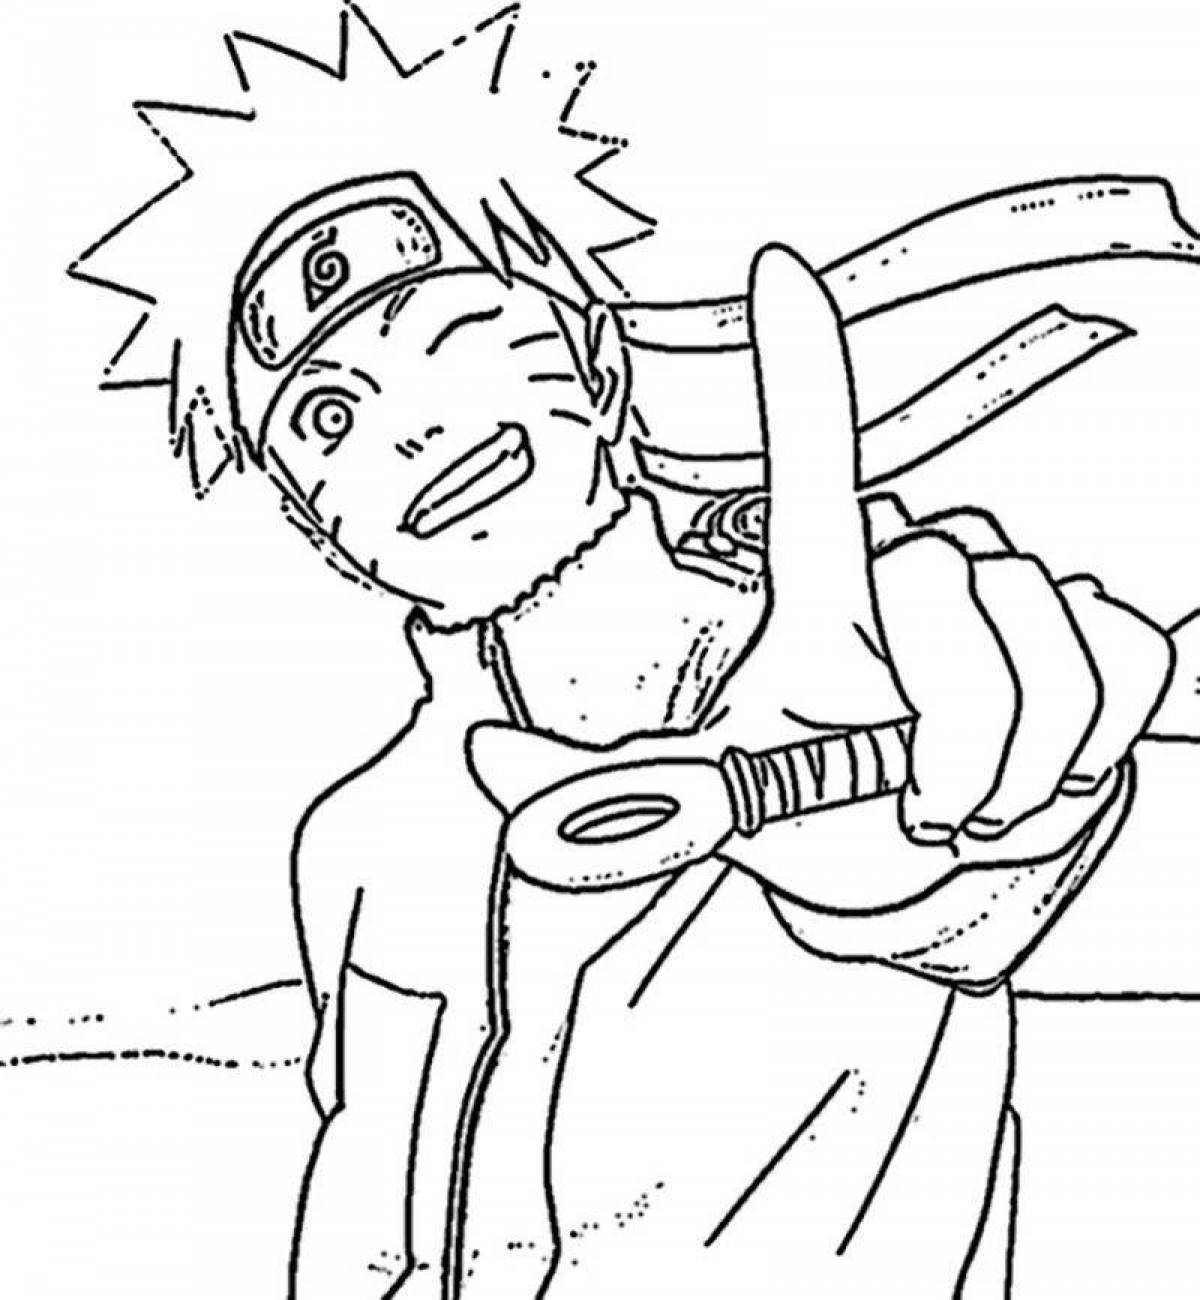 Animated naruto coloring pages for kids